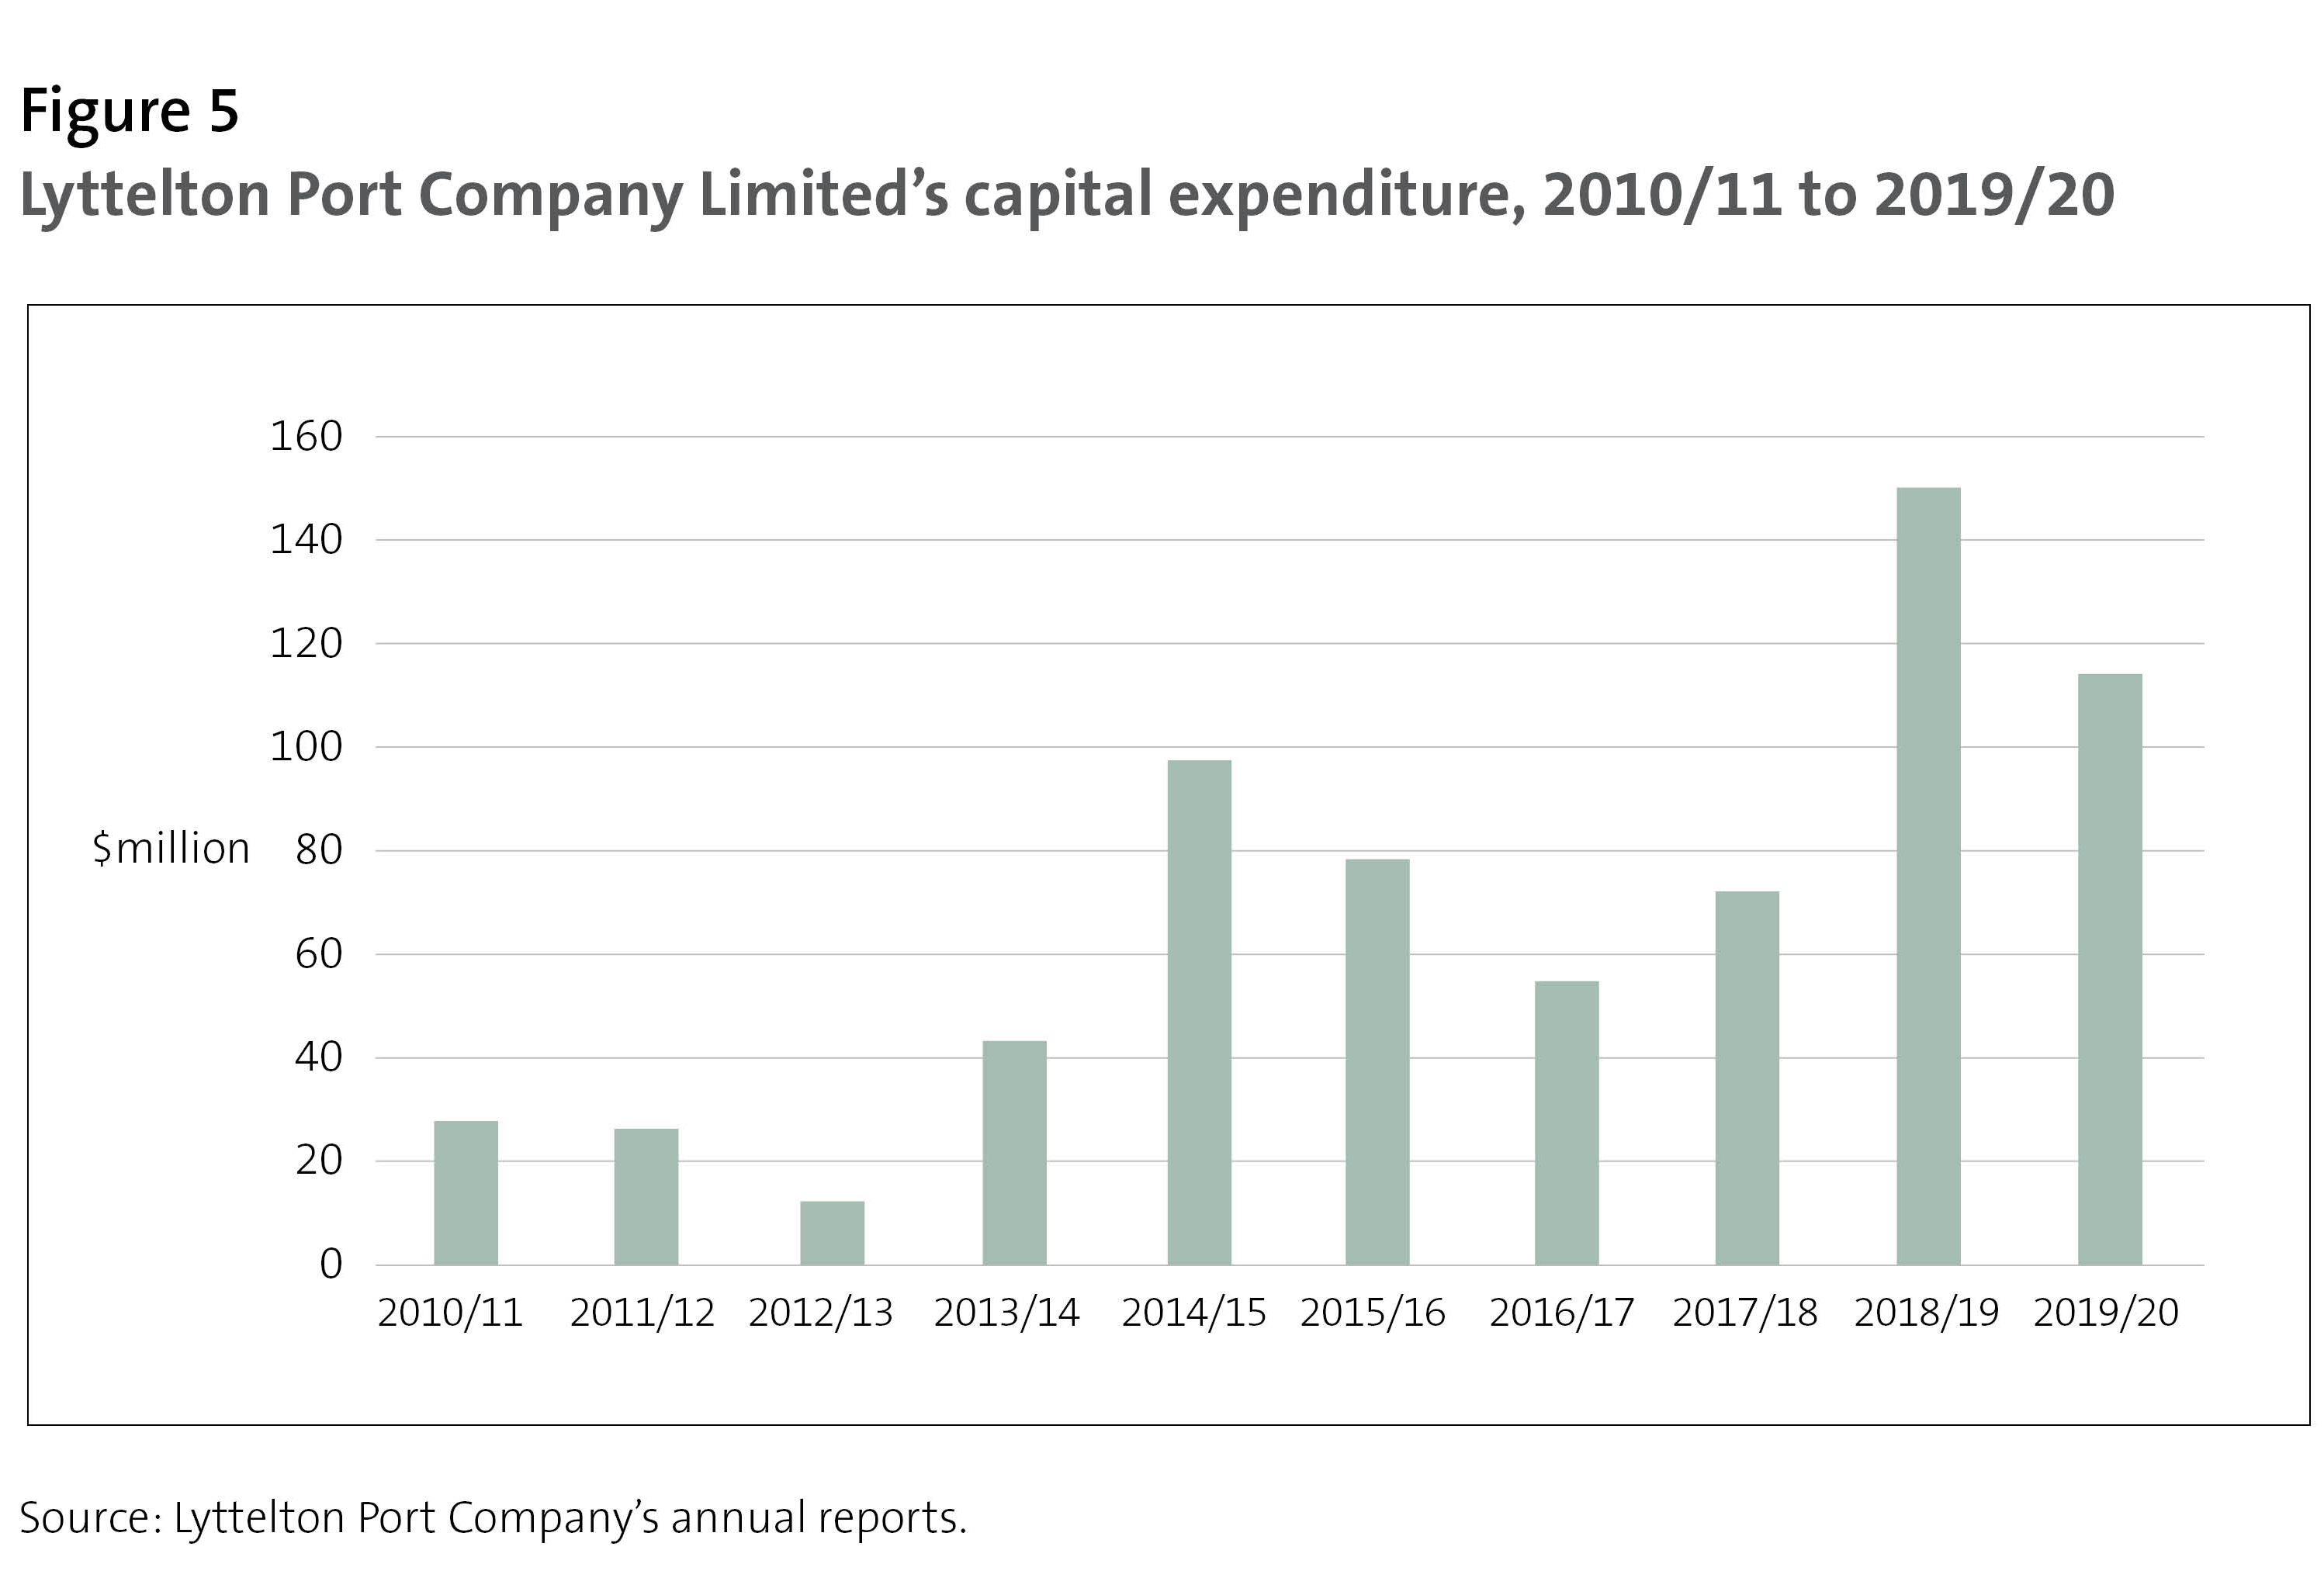 Figure 5 - Lyttelton Port Company Limited's capital expenditure, 2010/11 to 2019/20